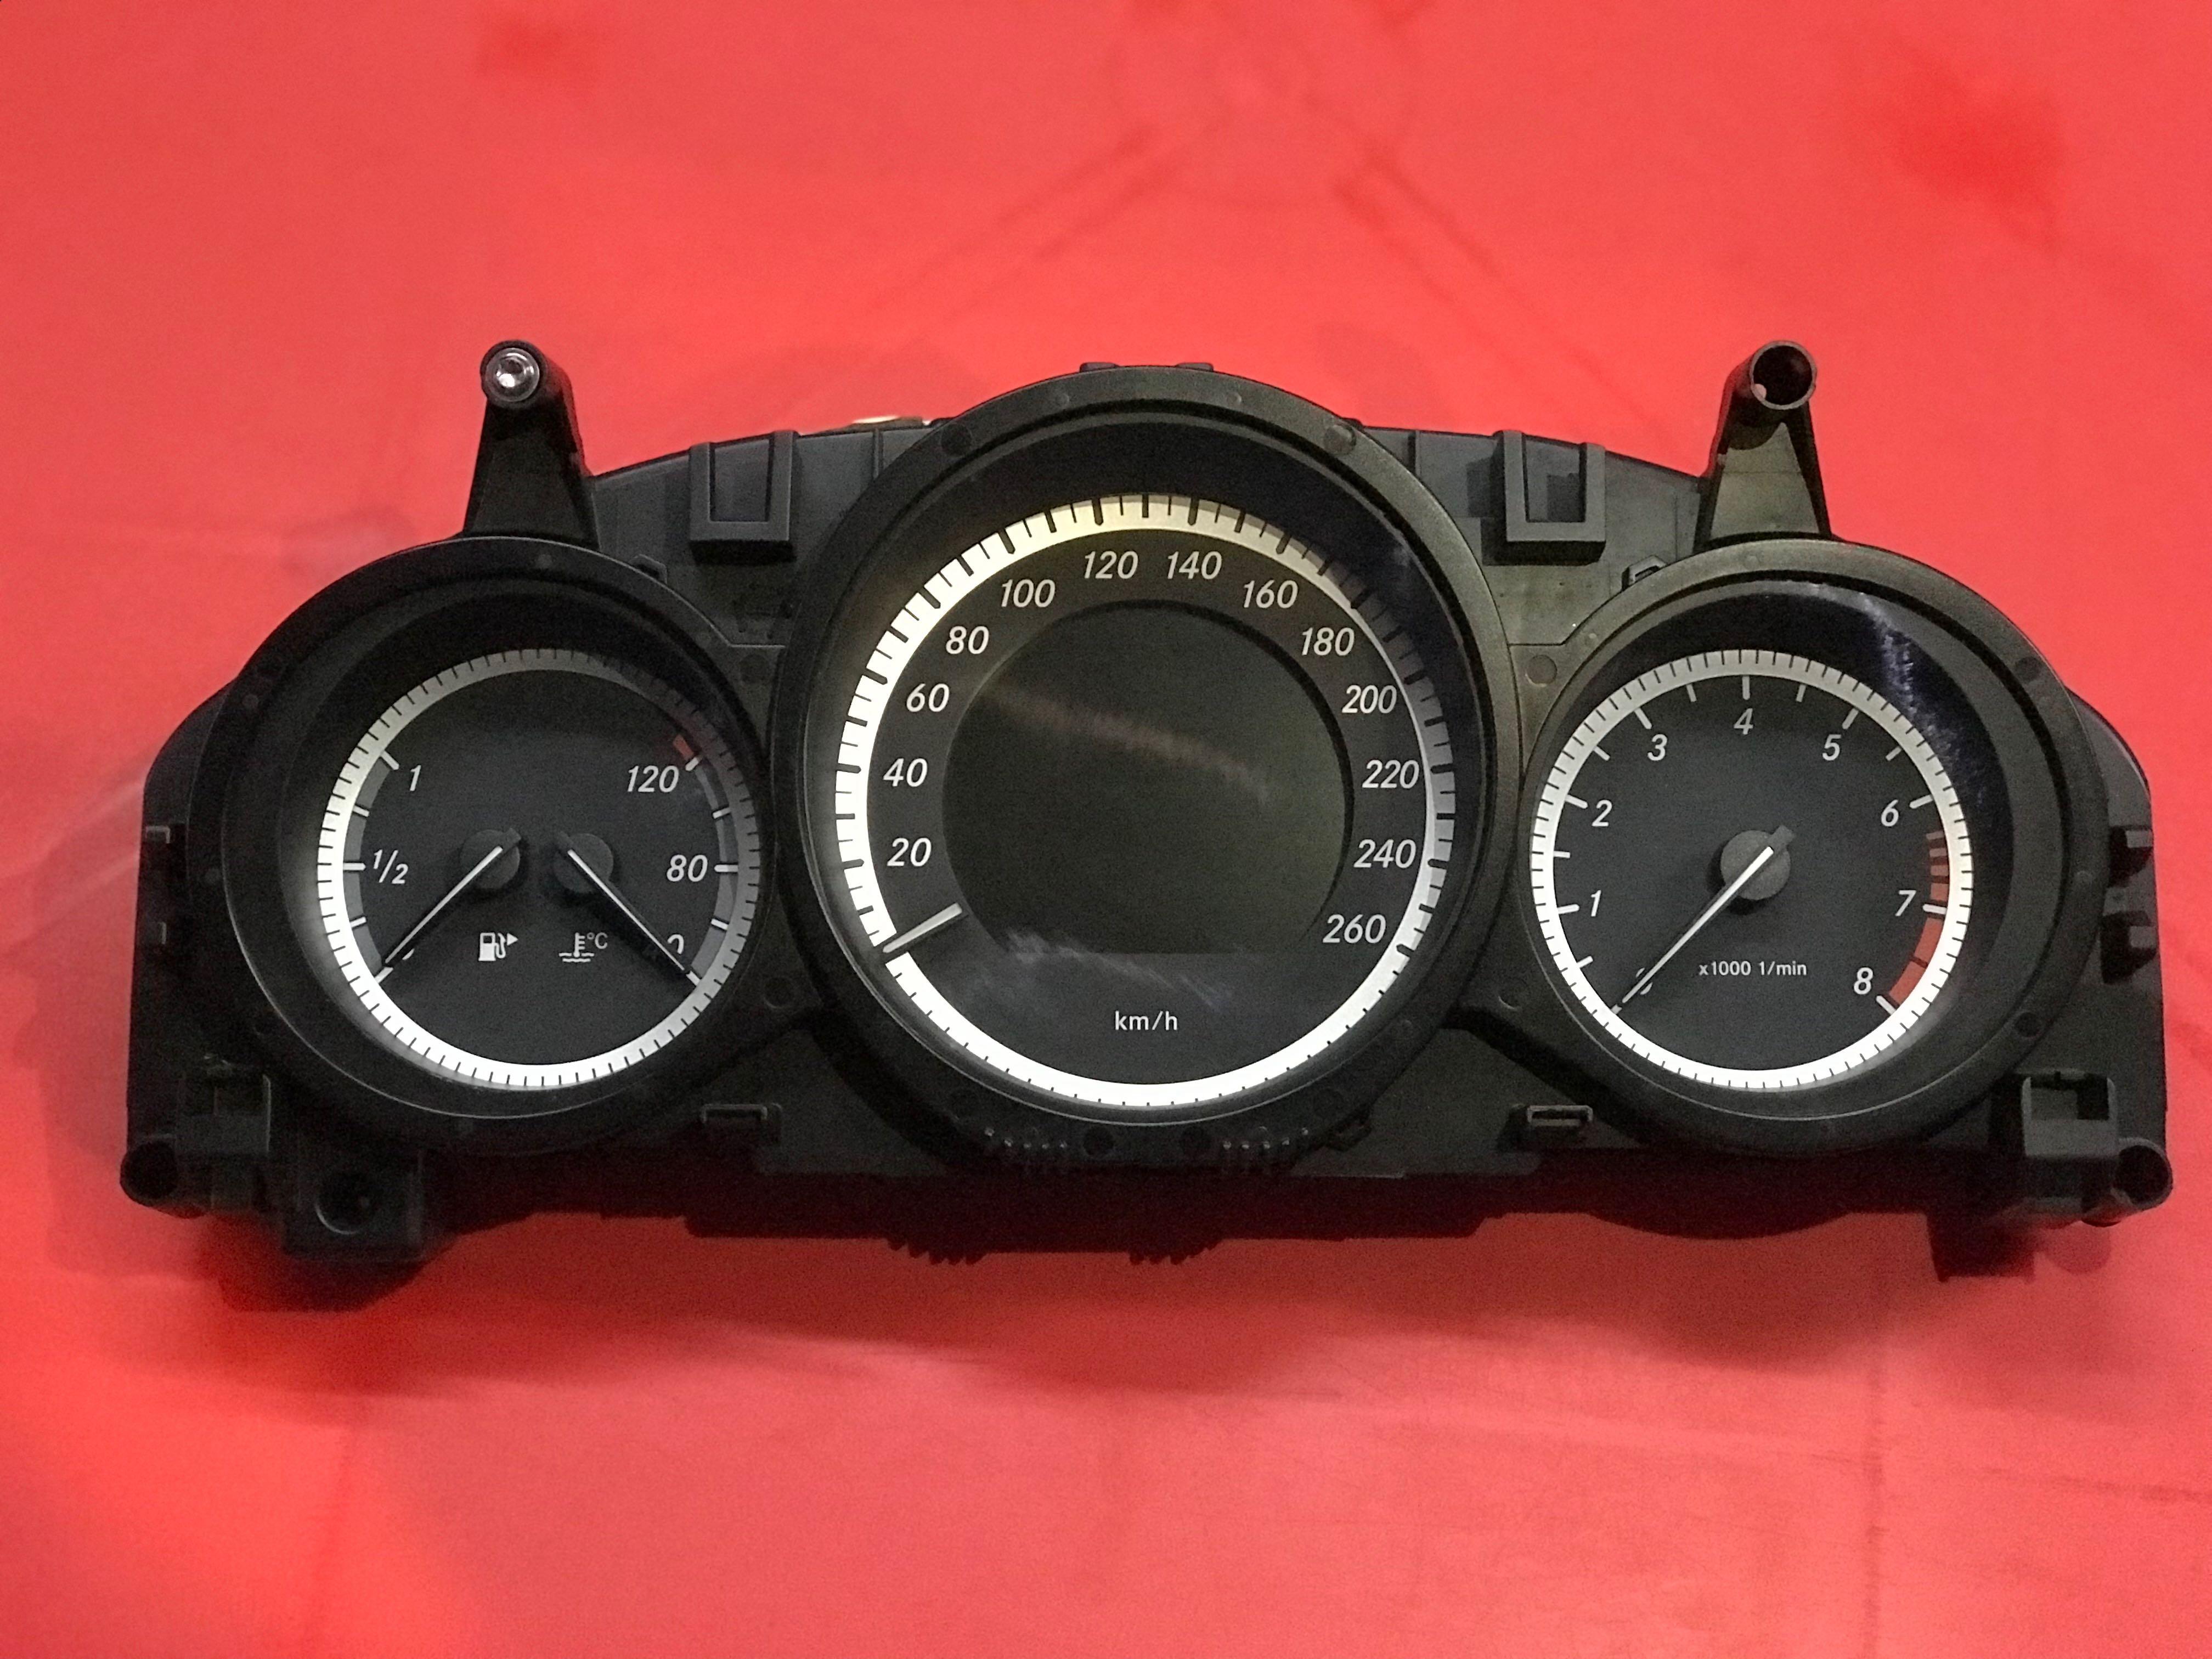 Mercedes-benz w204 meter cluster, Auto Accessories on Carousell